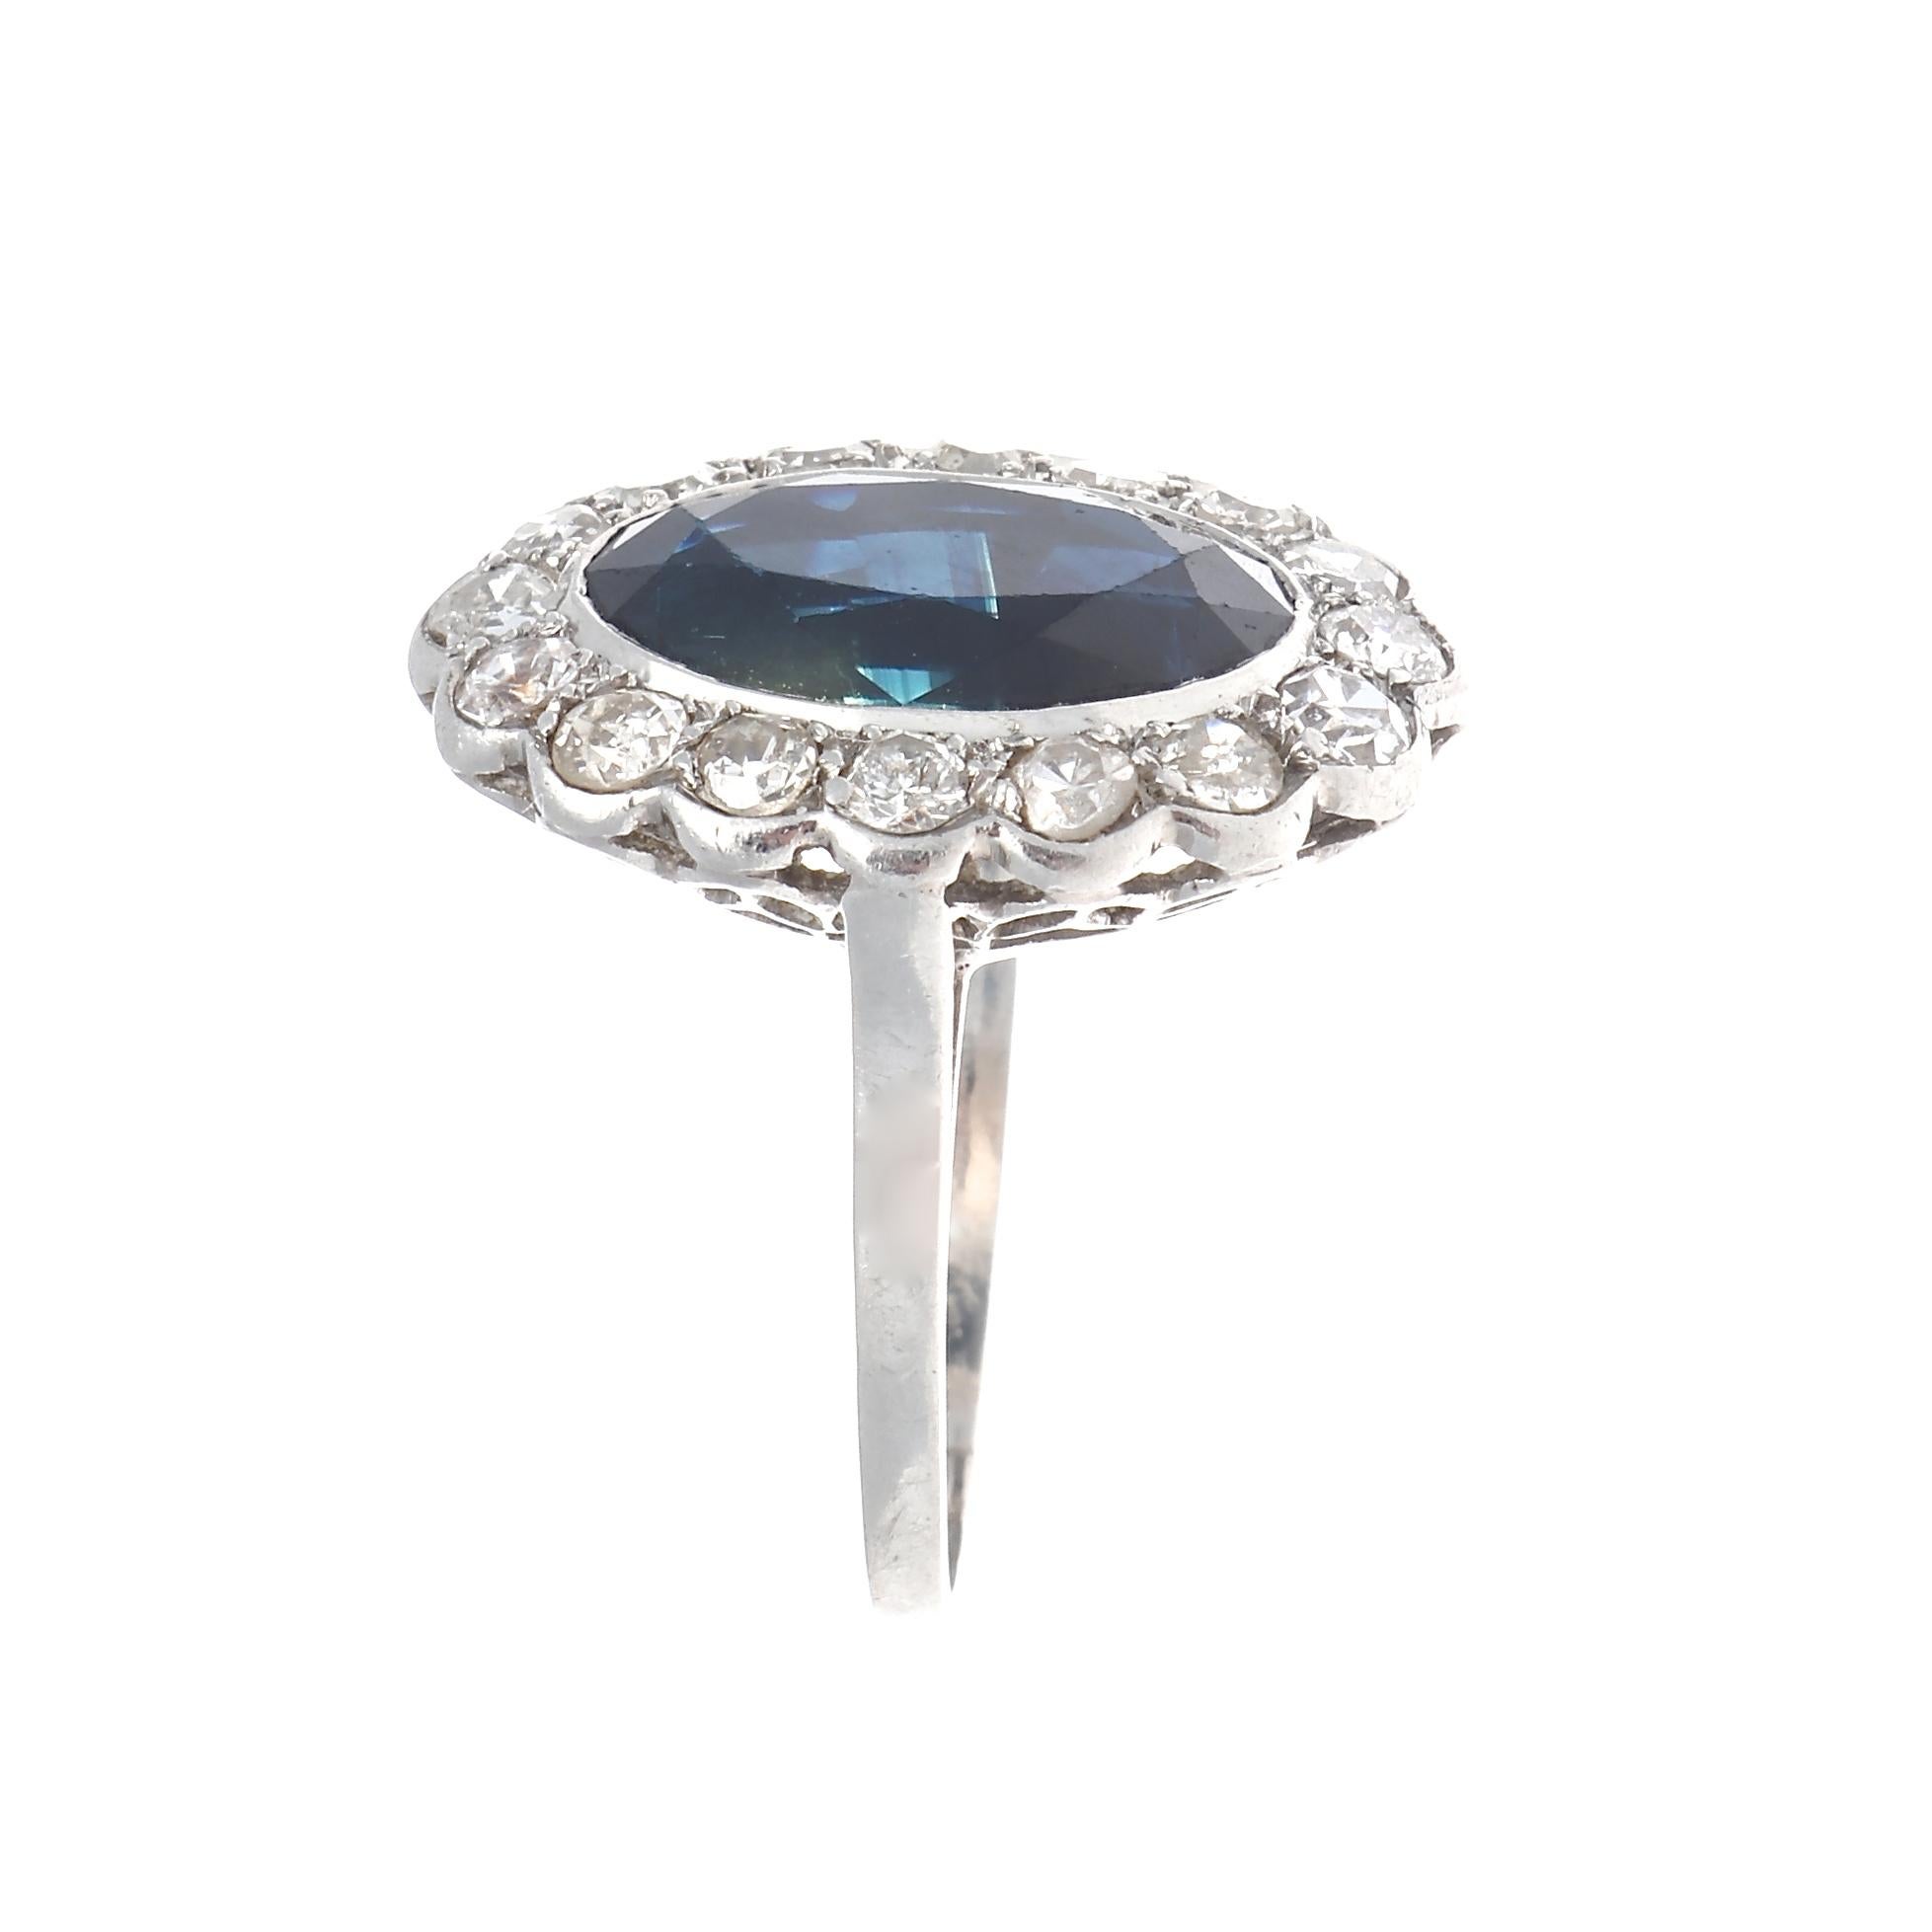 Classical design, culminating into an everyday chic accessory one looks for. Featuring a navy blue oval cut sapphire surrounded by numerous old cut diamond halo. Crafted in platinum. Stamped with French hallmarks. Ring size 5 3/4 and can easily be